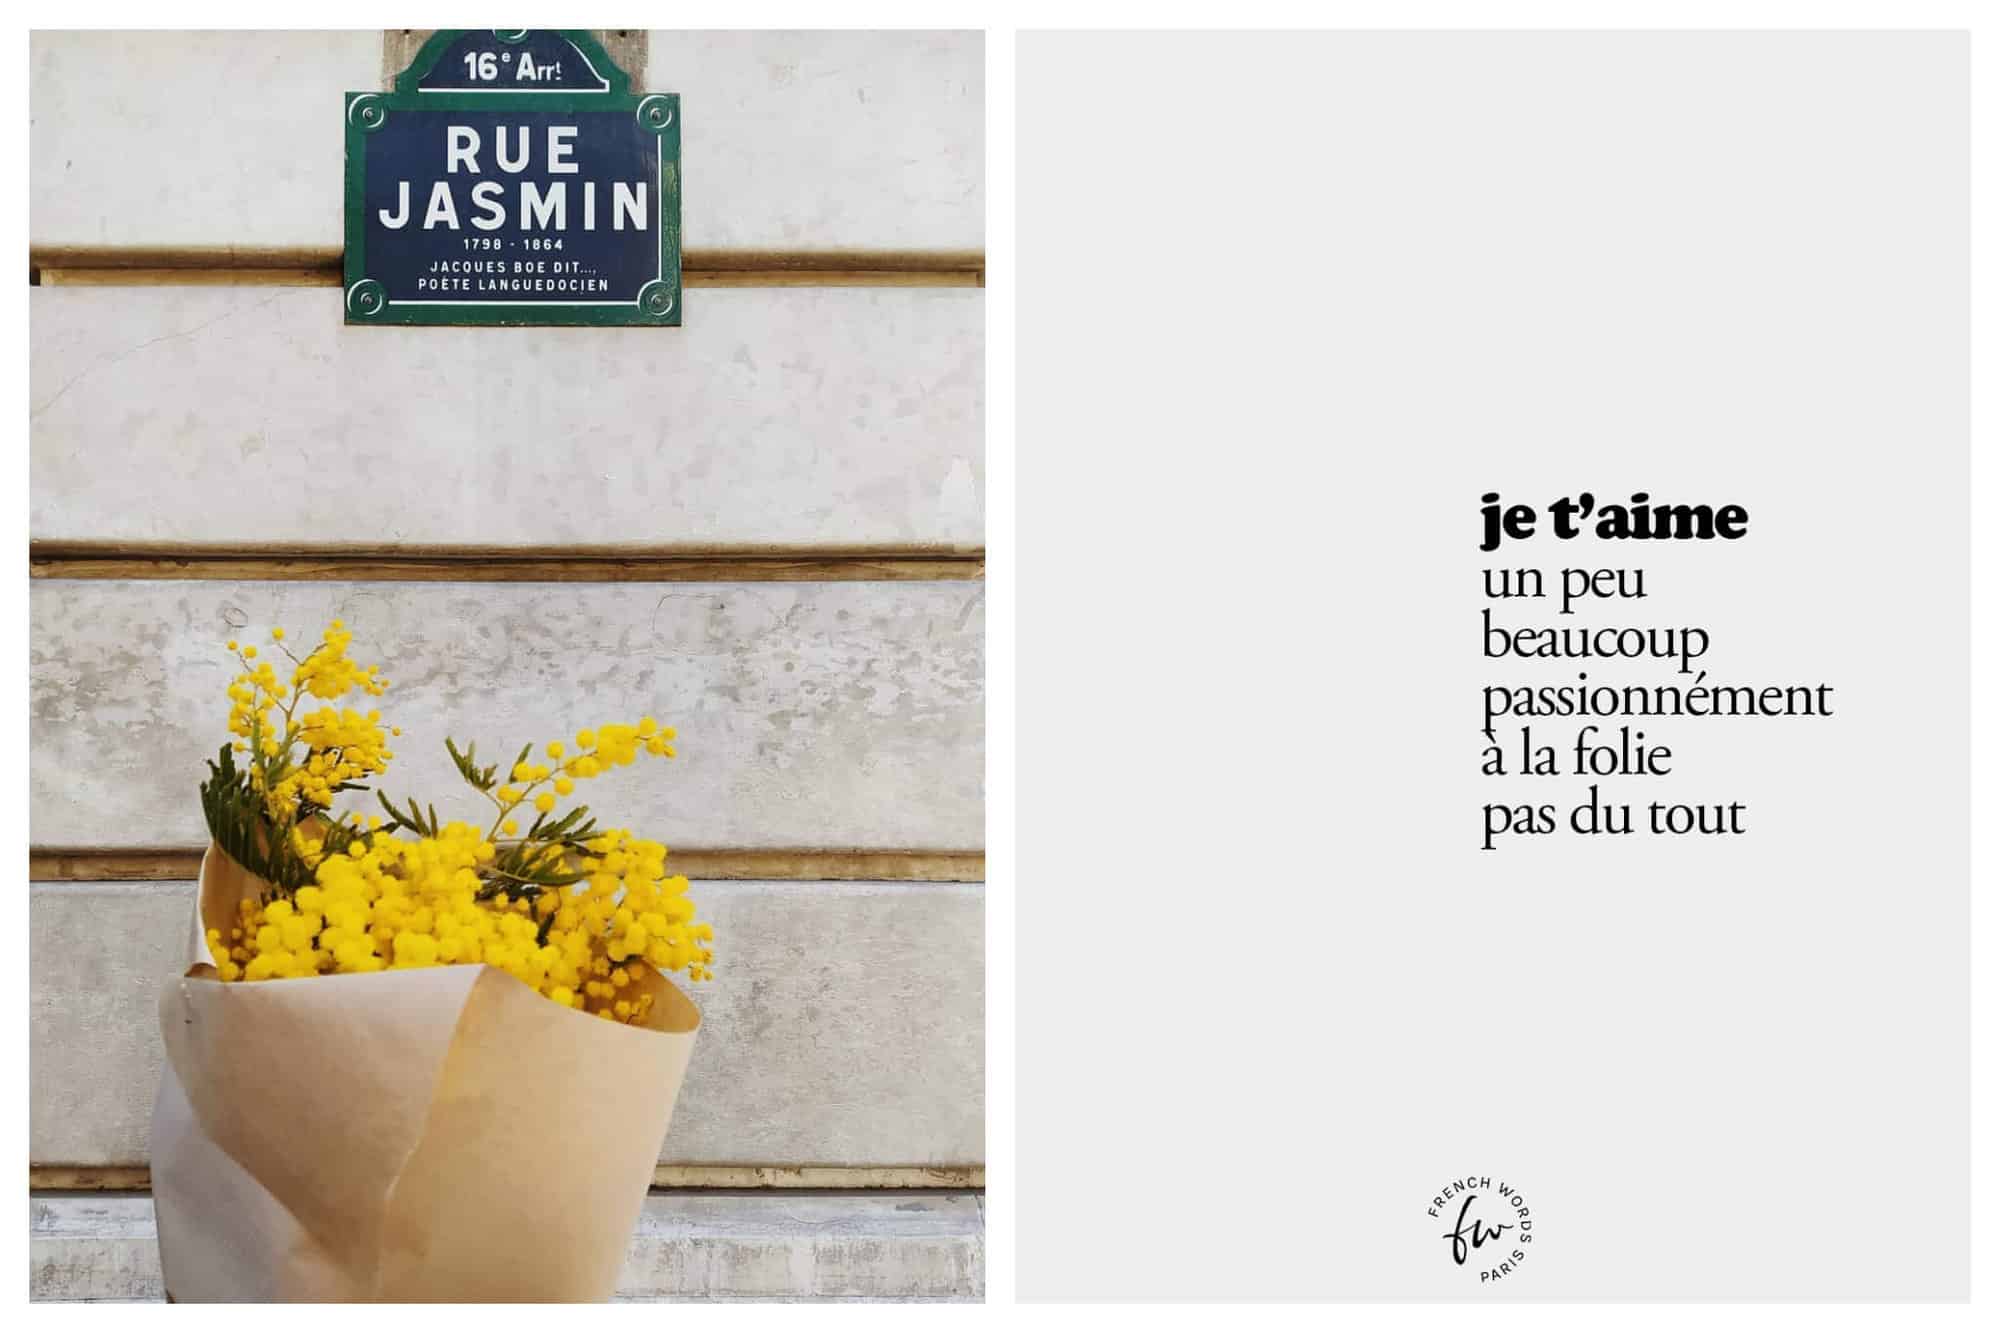 right: a picture of a bunch of mimosa flowers in front of a street sign in Paris, rue jasmin. Right: text of a short poem in french, je t'aime un peu beaucoup passionnément à la folie pas du tout. 